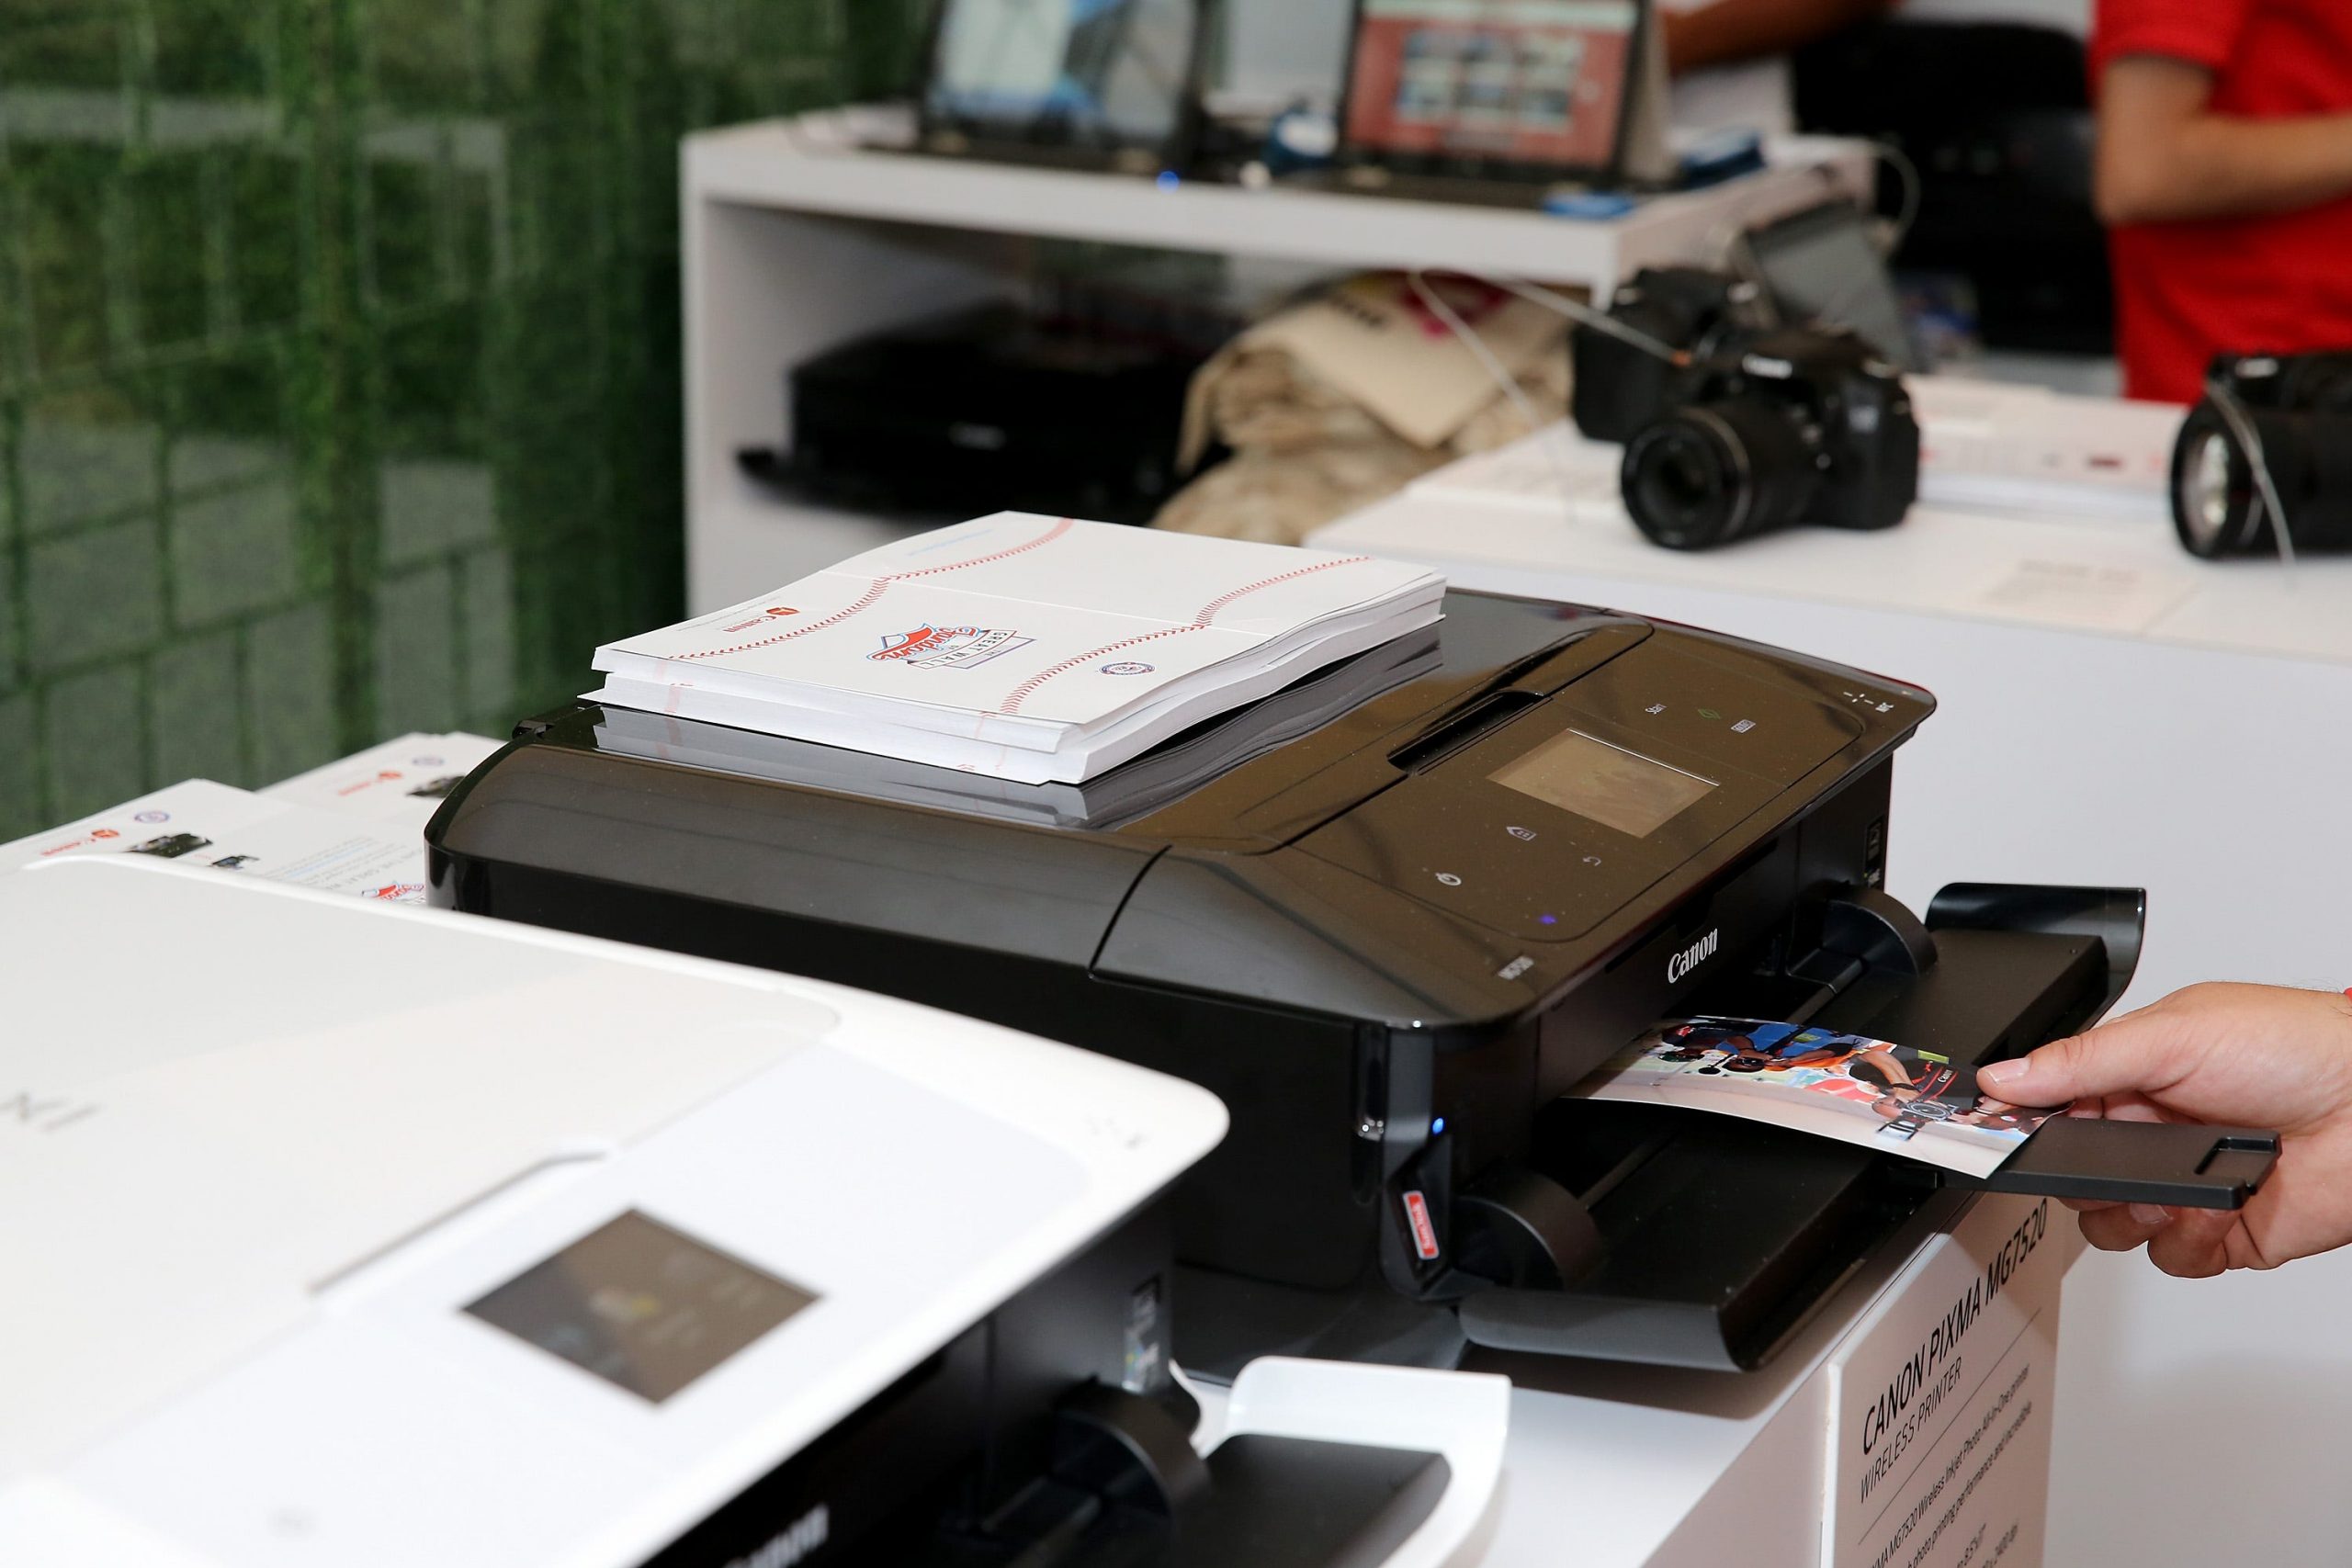 A Canon PIXMA printer on display at a booth